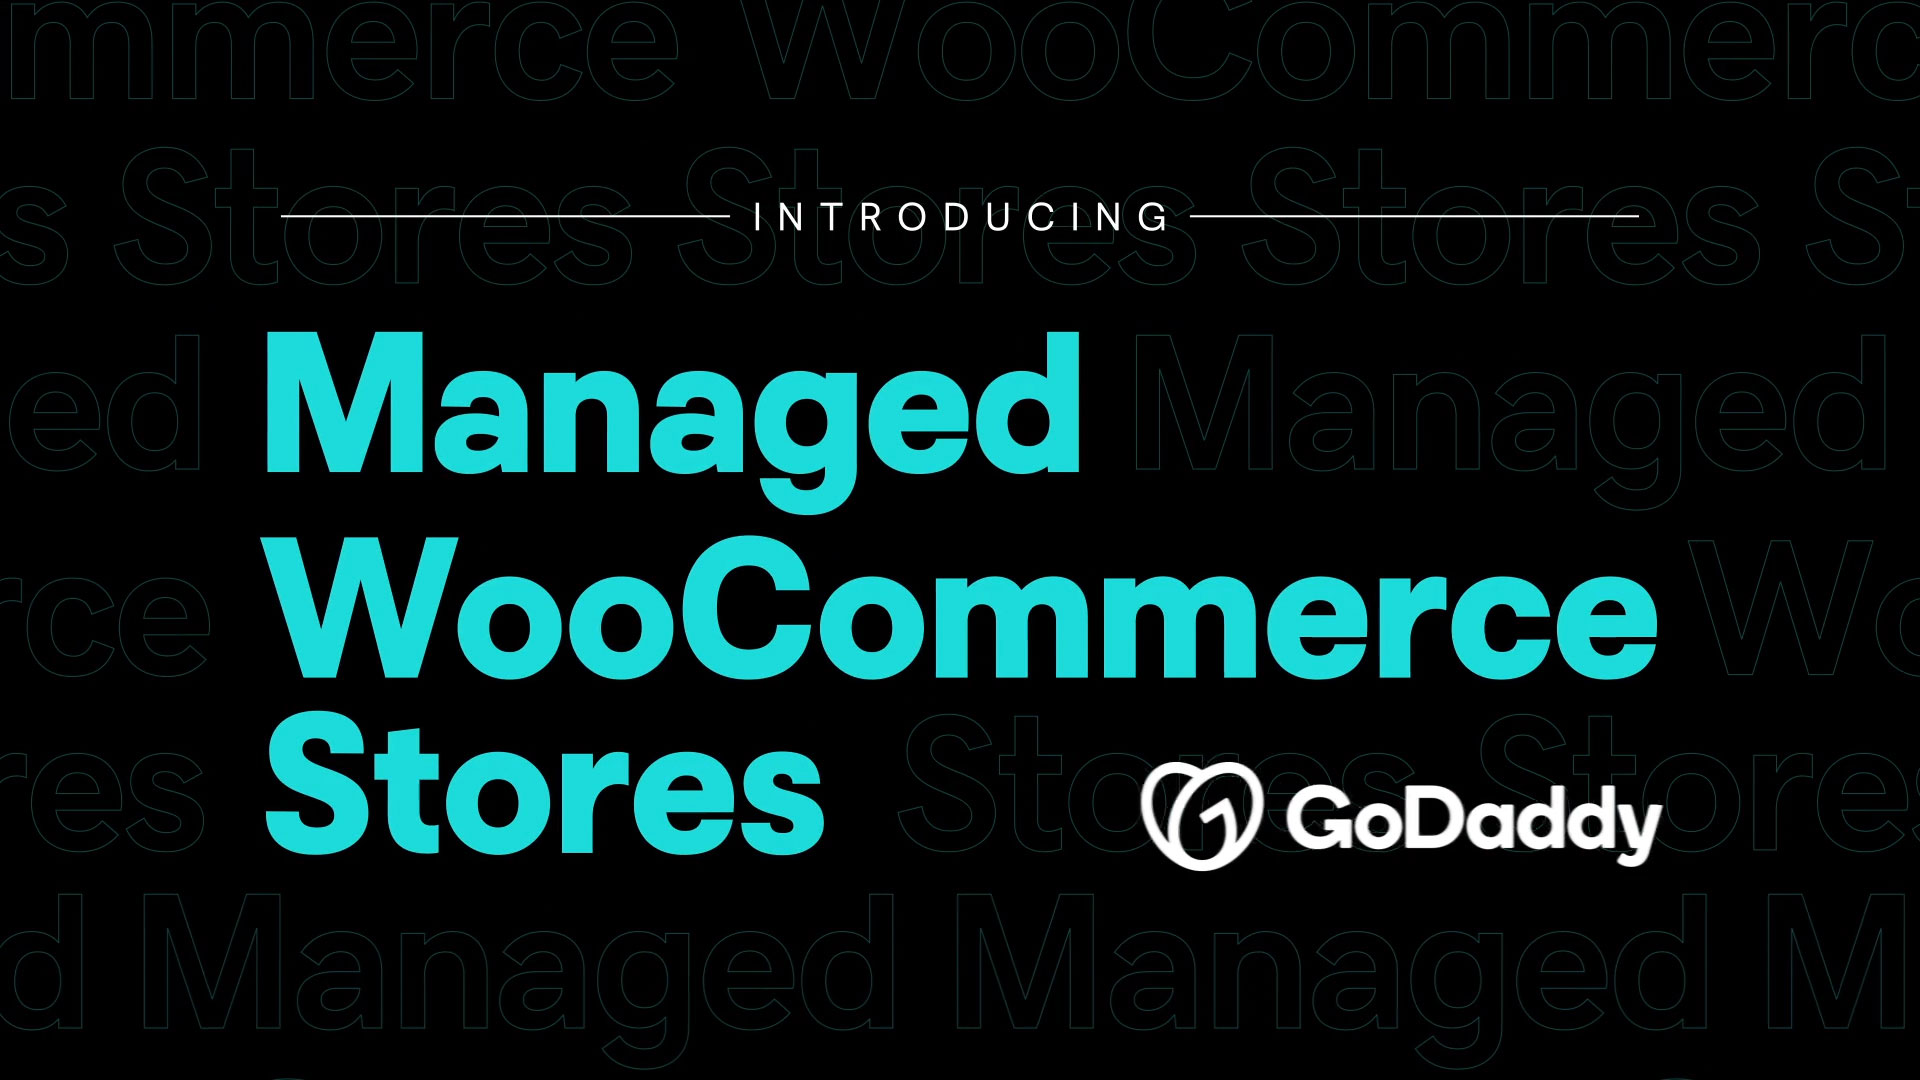 GoDaddy's Managed WooCommerce Stores solution allows businesses to sell wherever customers shop through flexible, scalable and fully managed WordPress e-commerce stores.